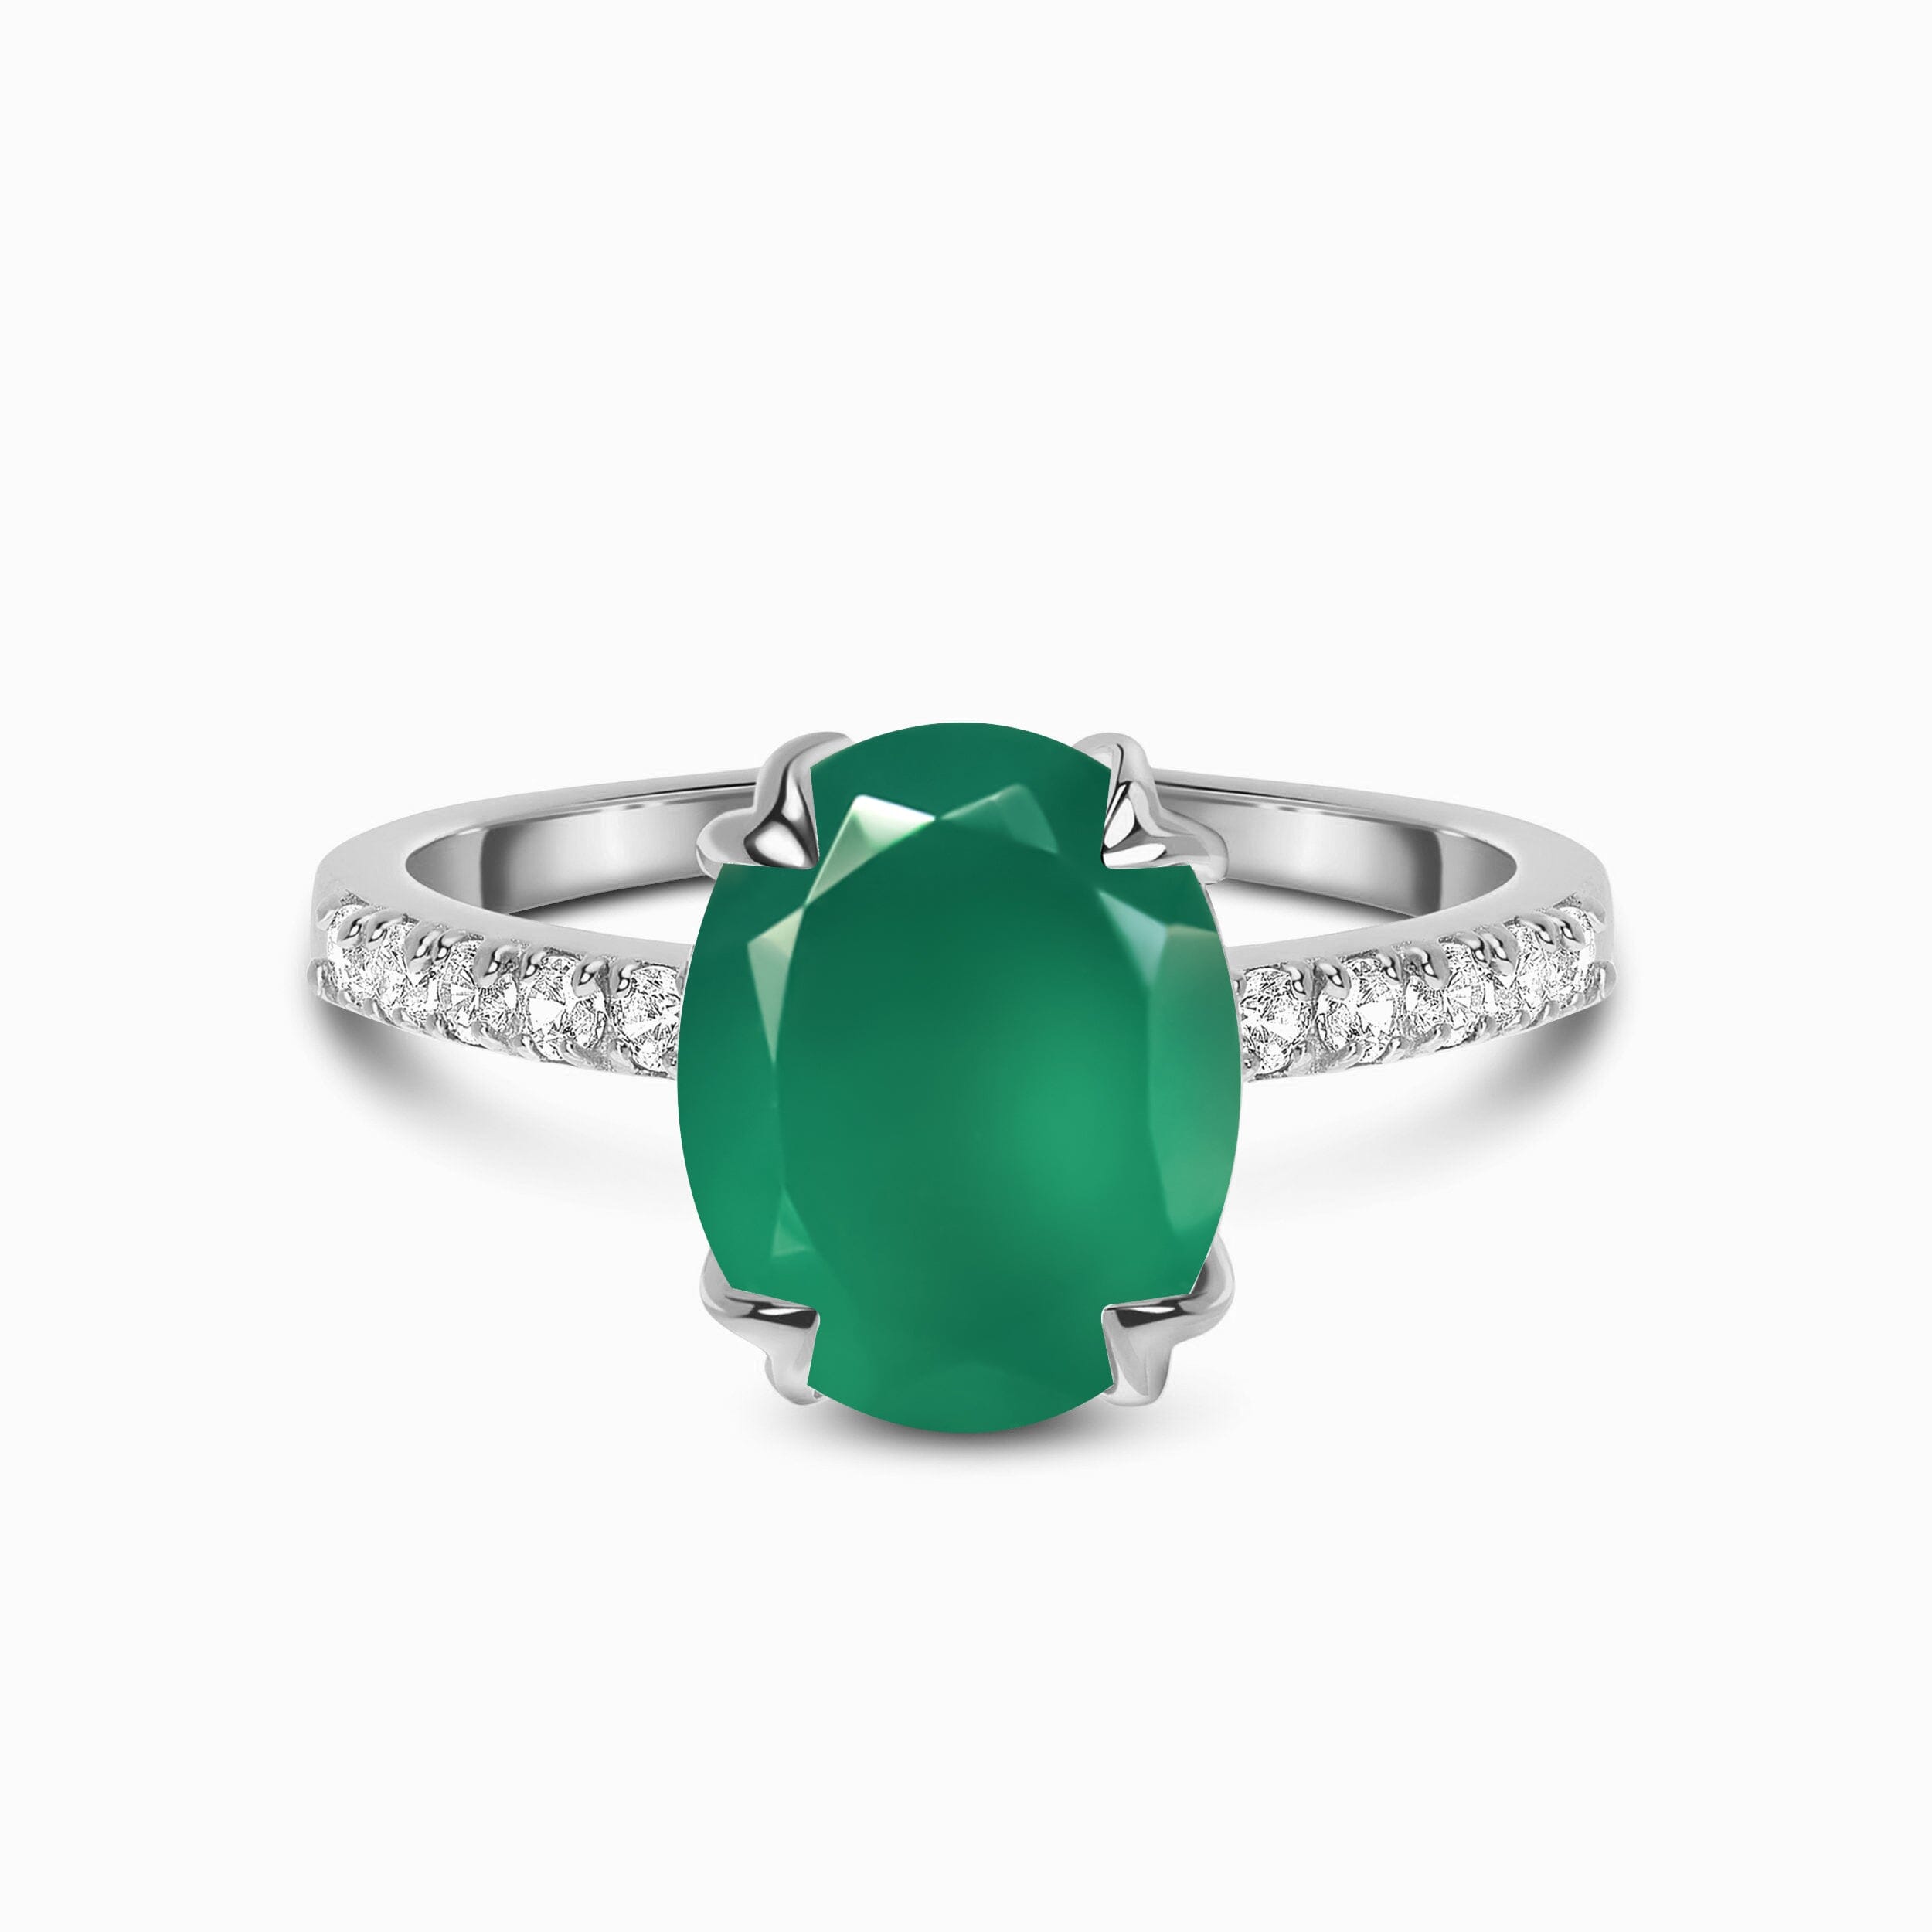 Green Gemstone Meaning and Healing Powers - The Definitive Guide